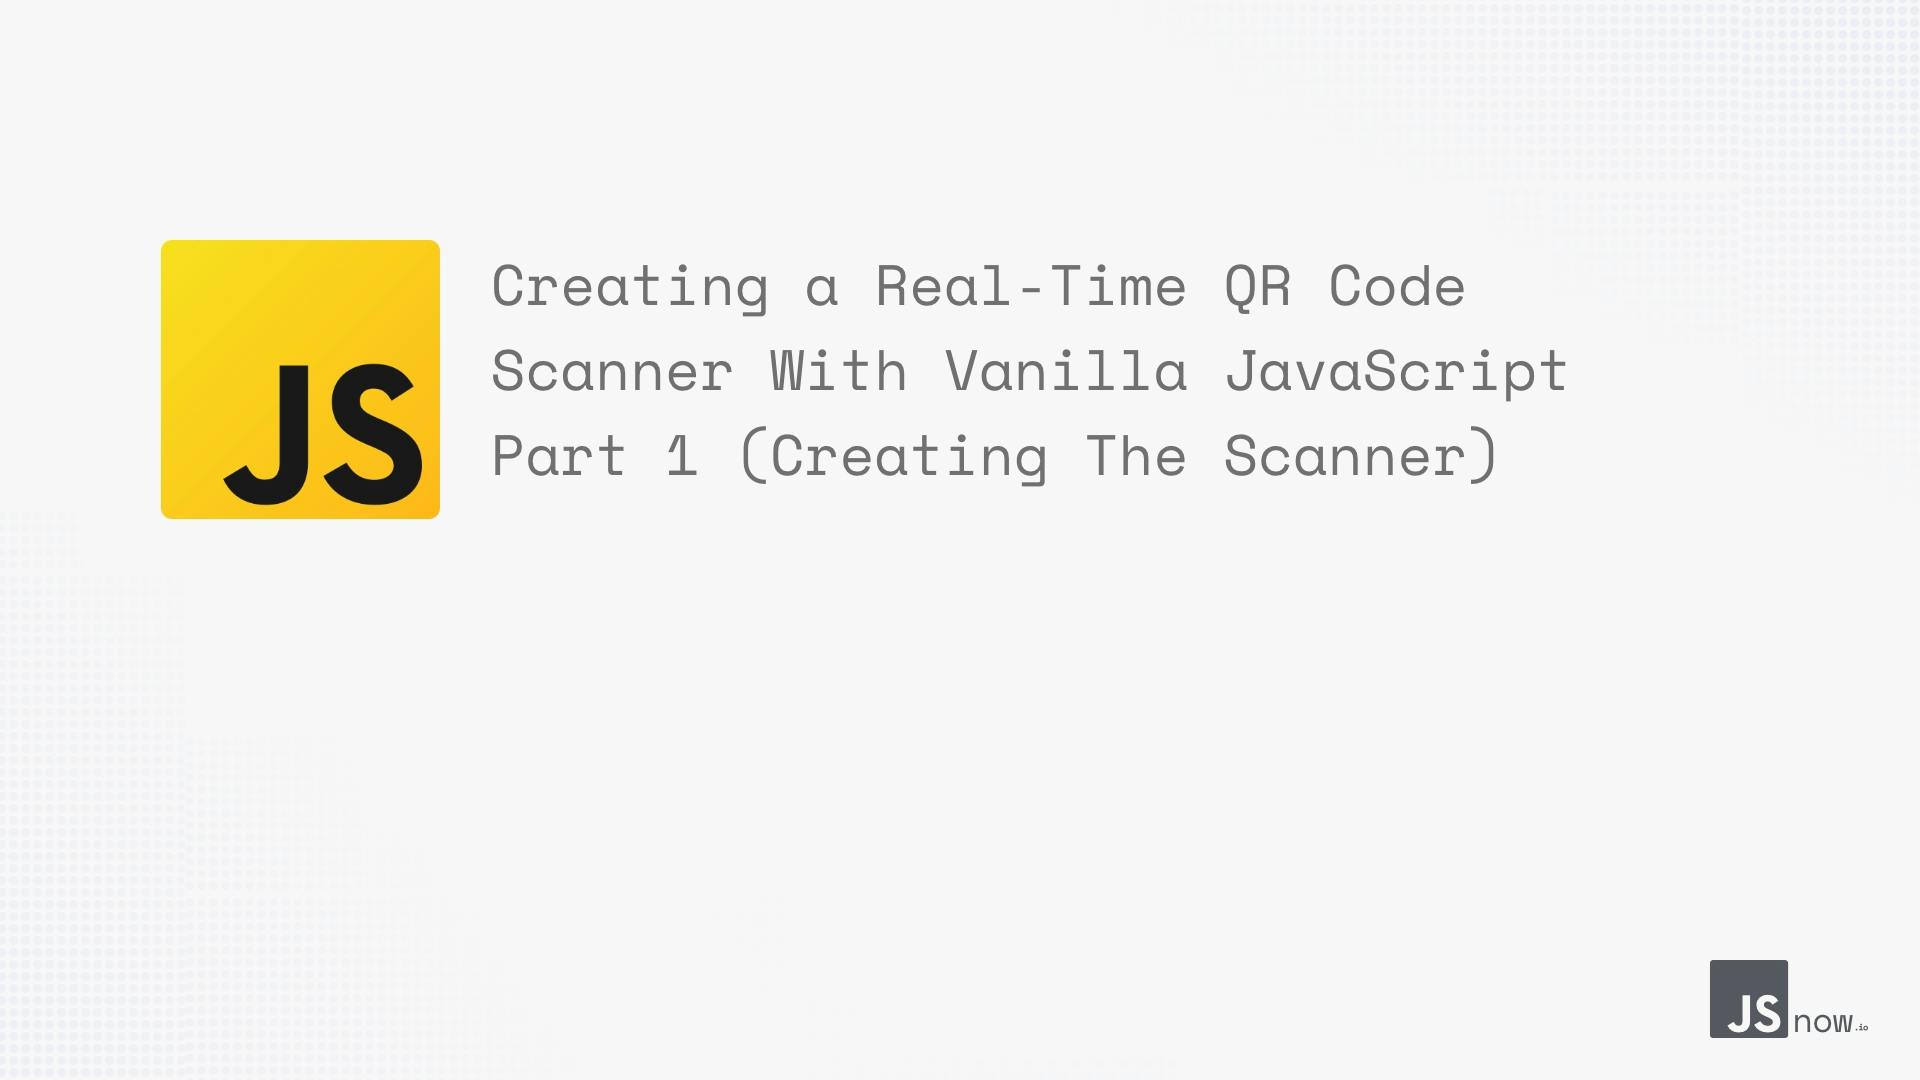 Creating a Real-Time QR Code Scanner With Vanilla JavaScript Part 1 main image